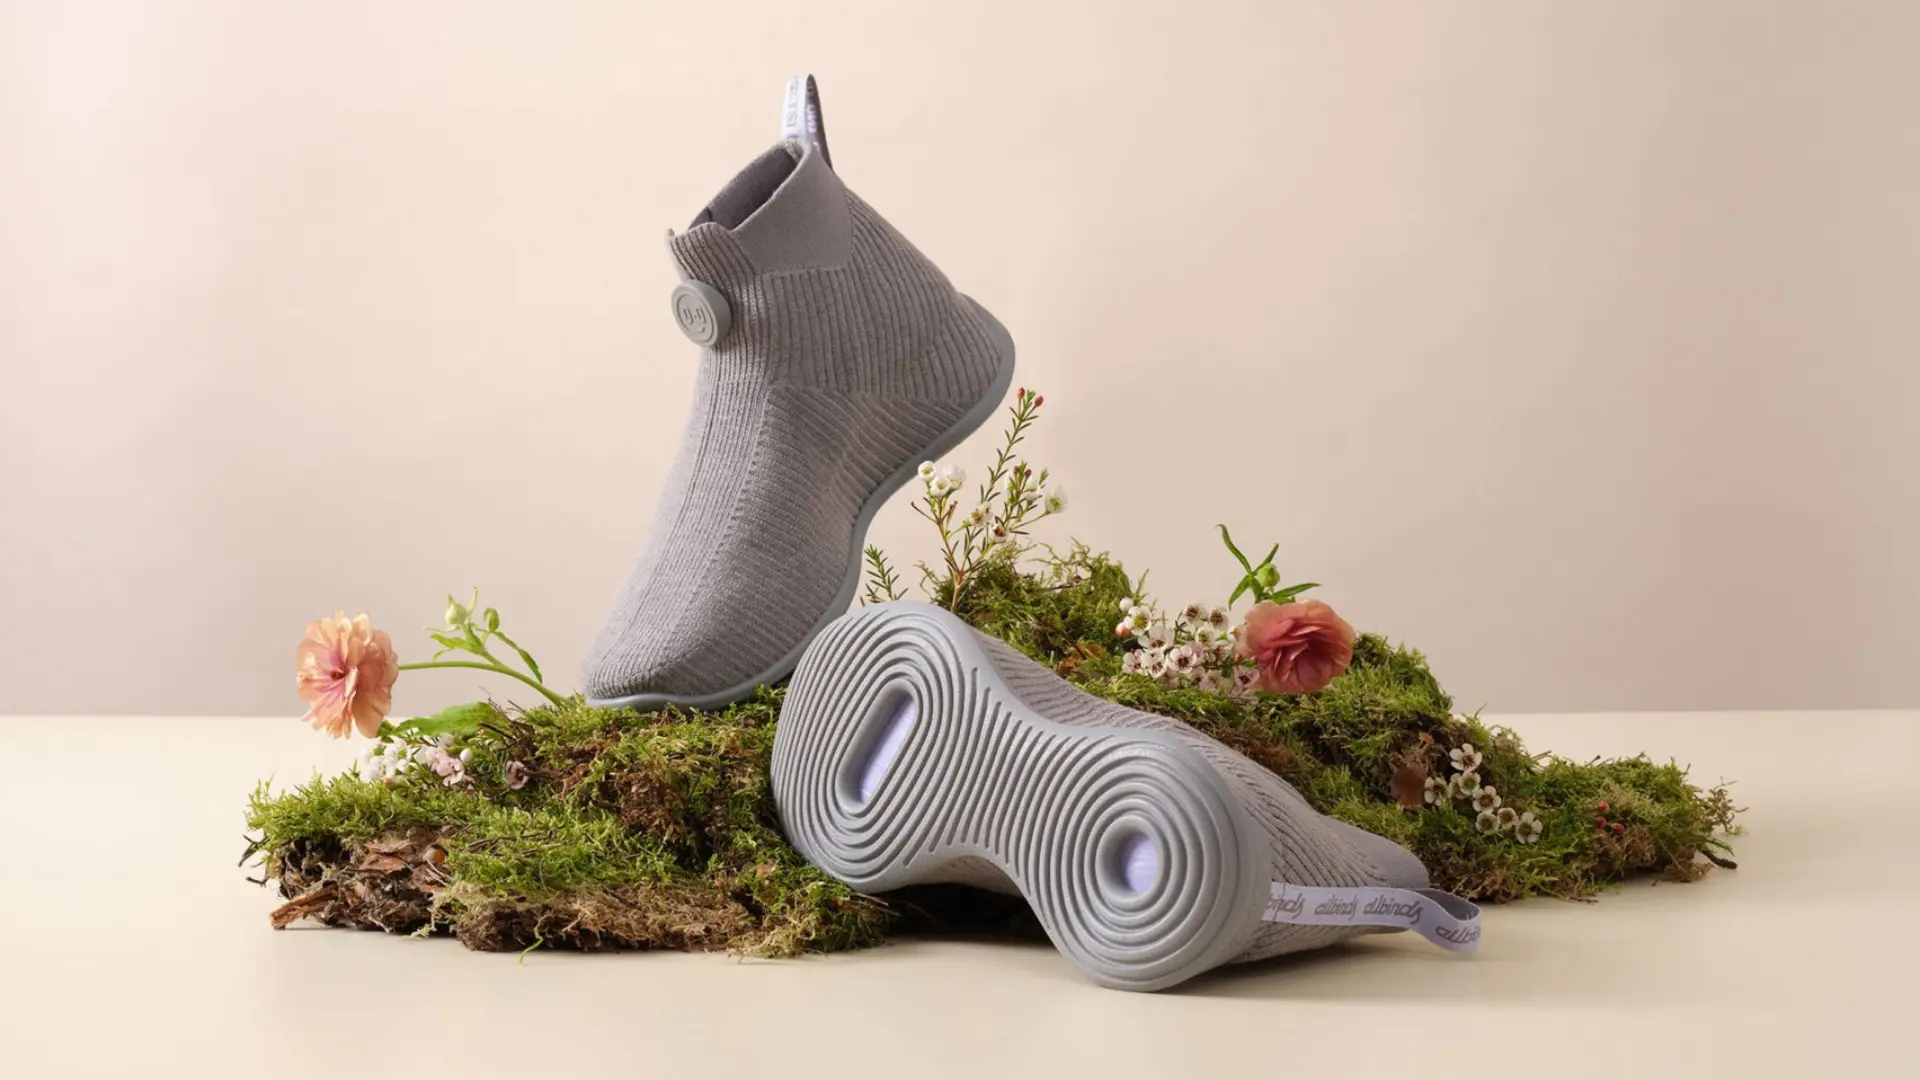 M0.0NSHOT - from regenerative wool to the world’s first net-zero carbon shoe